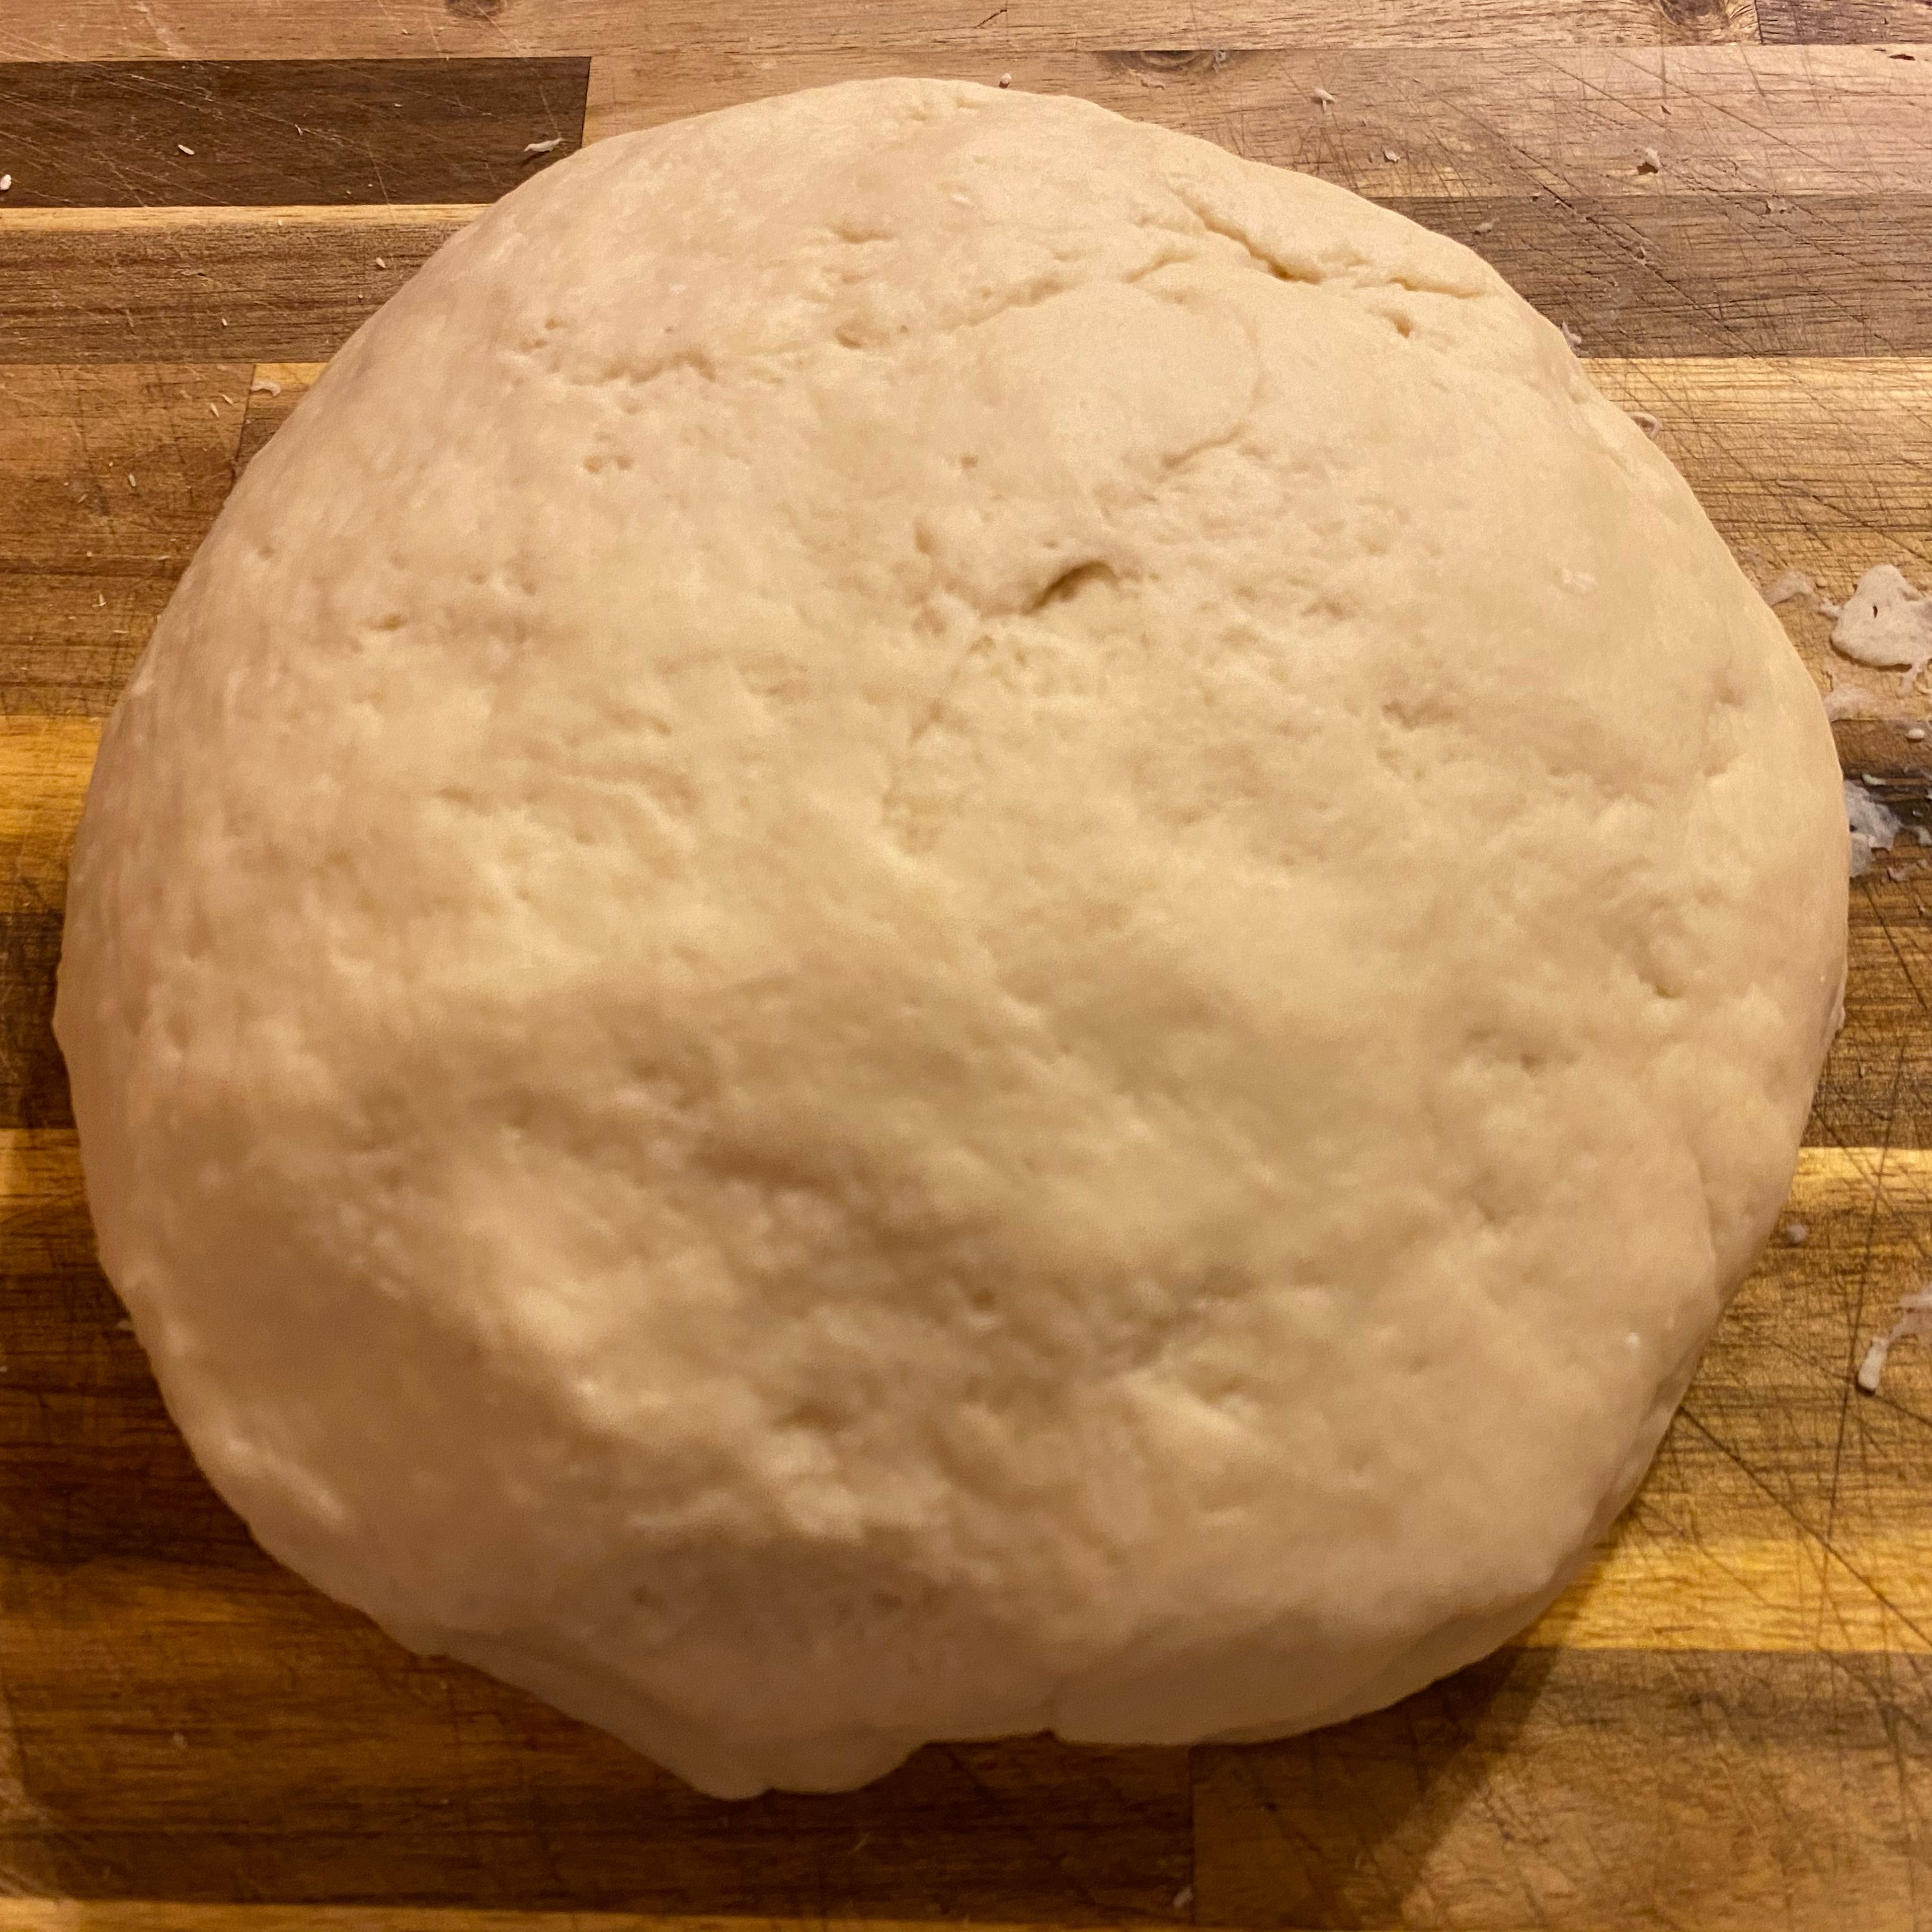 Remove the chilled dough from the fridge and divide evenly into 12 sections. Roll into golf sized balls.